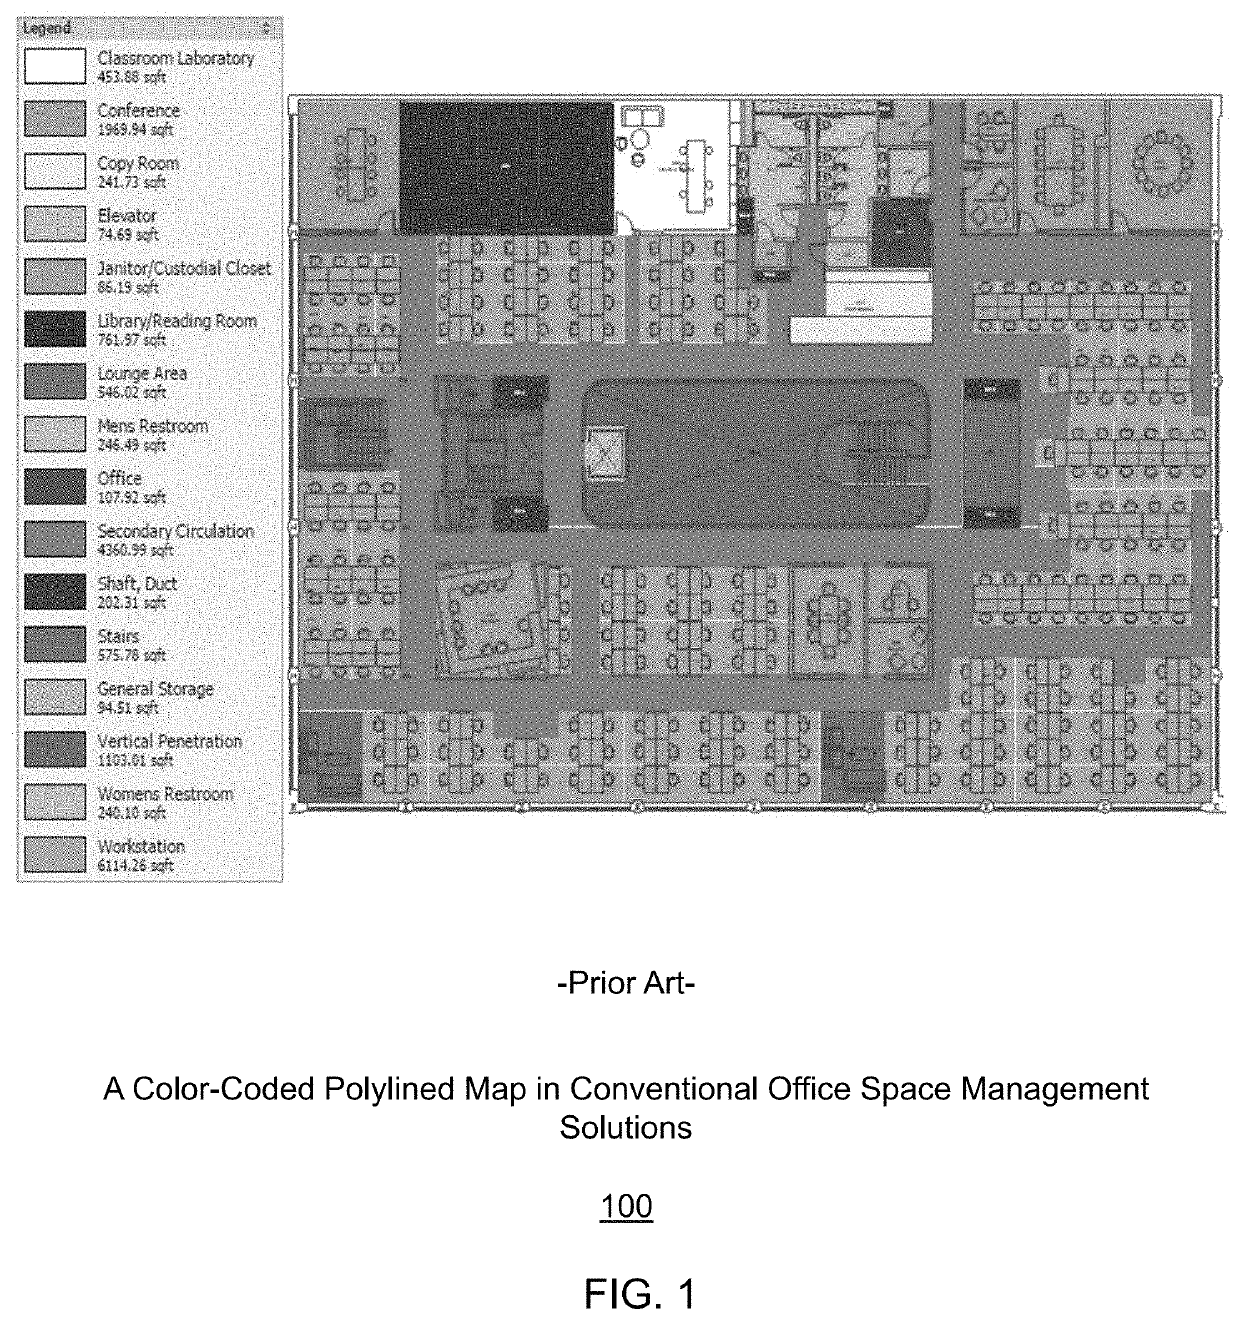 Dynamic Spatial Clustering Construction and Visualization System for Office Space Planning and Optimization